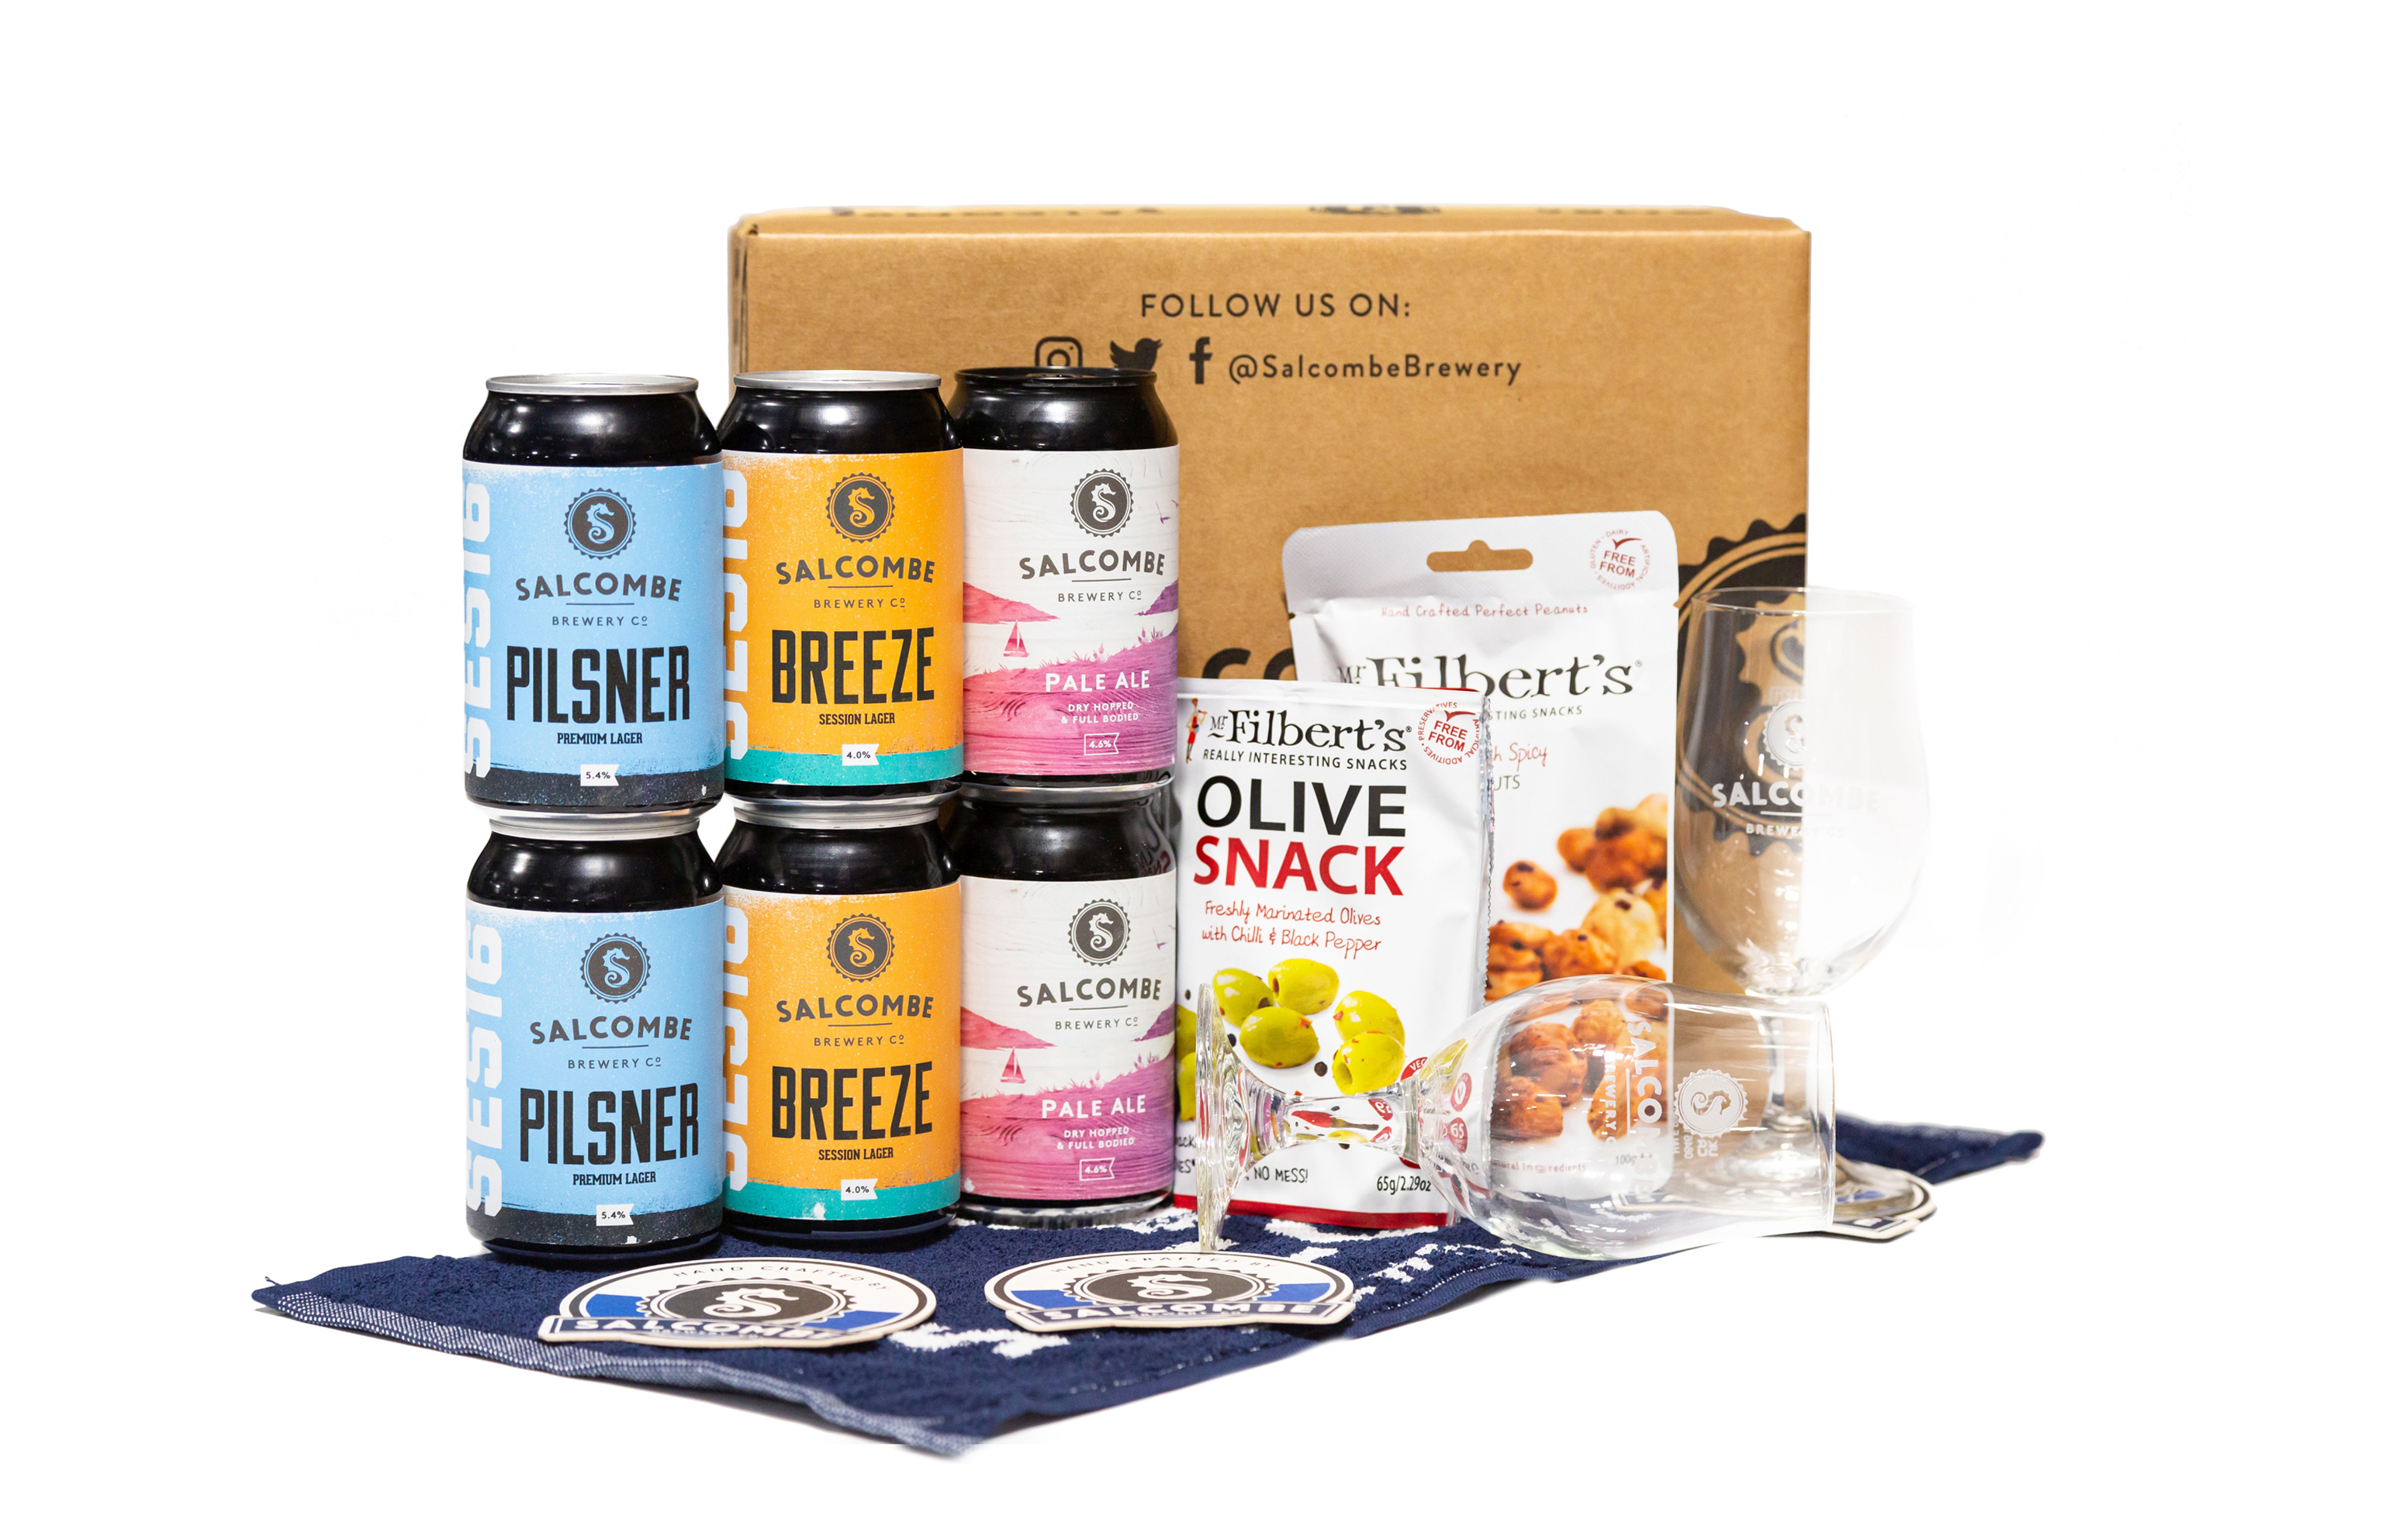 Salcombe Brewery Pub in a Box – Discovery, Salcombe Brewery